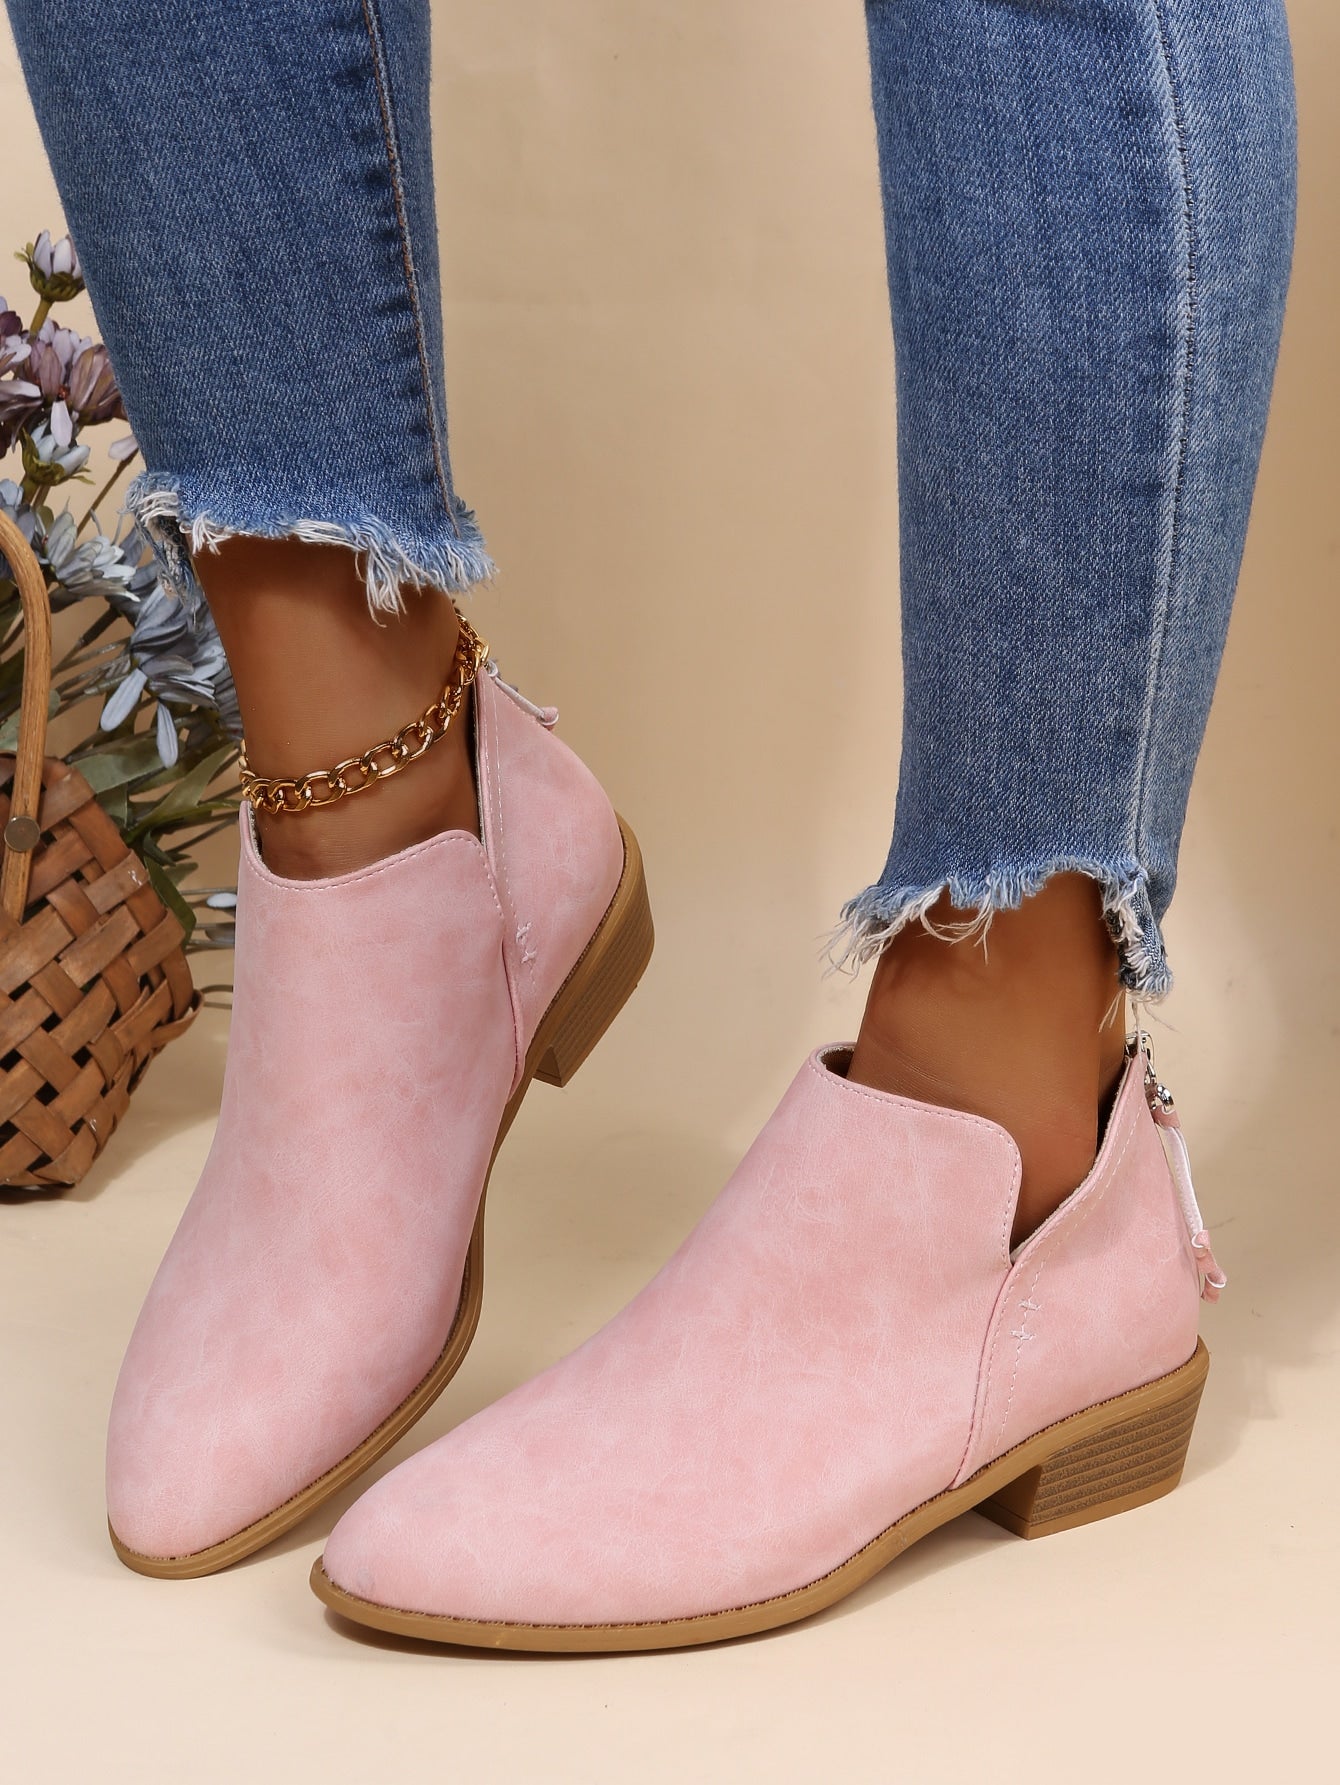 Solid Pink Color American Style Short Boots, Minimalist Design With Back Zipper